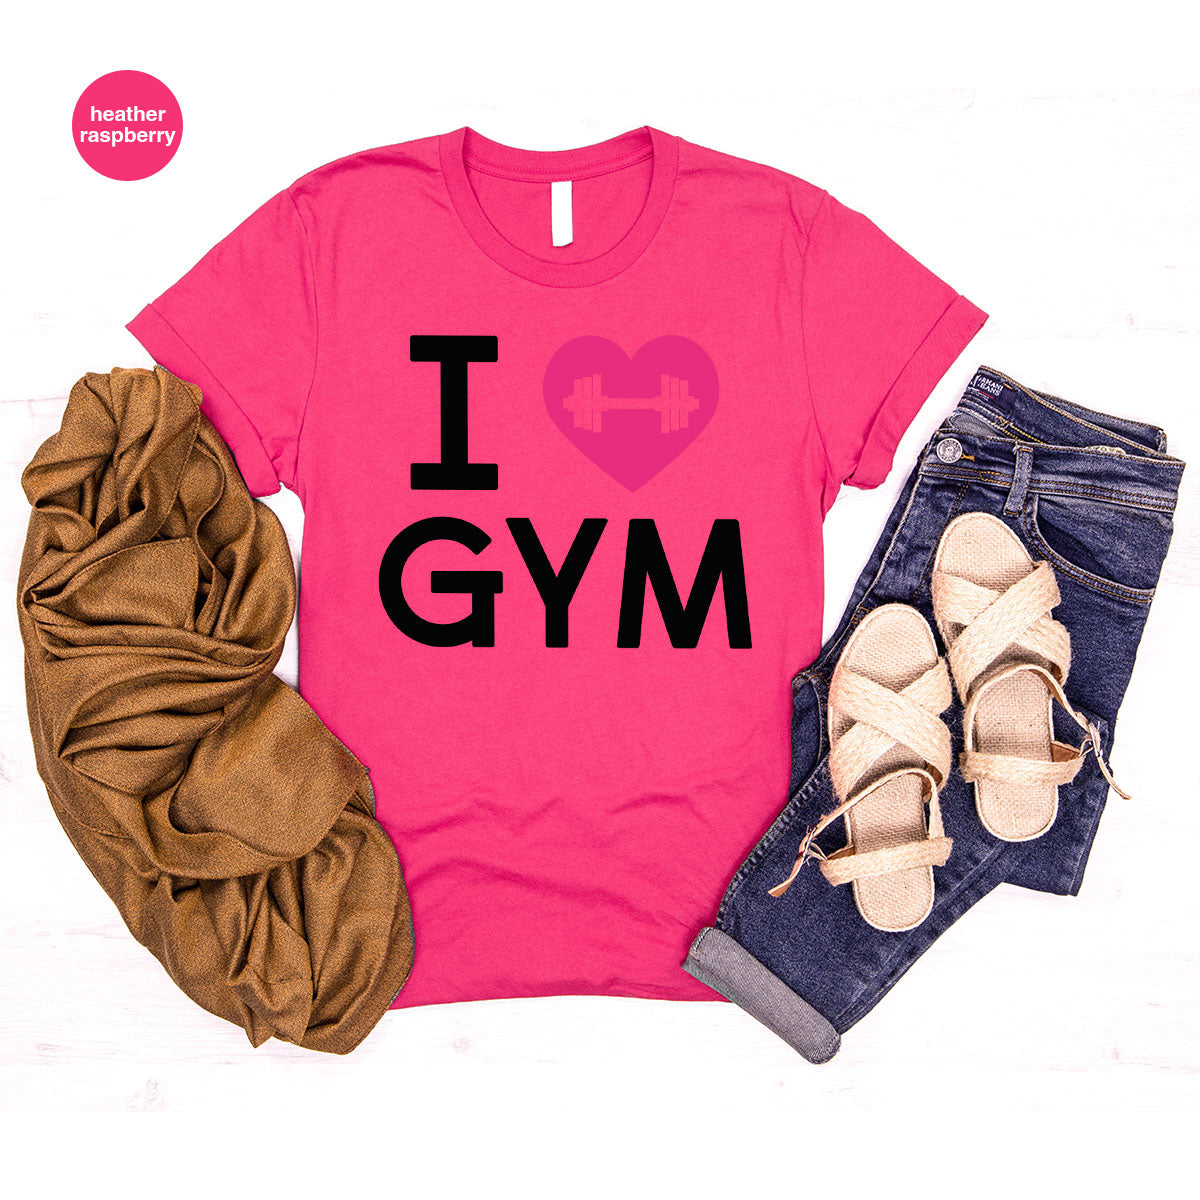 Funny Gym Shirt, Fit-ish Definition Shirt, Fitness T Shirt, Fit